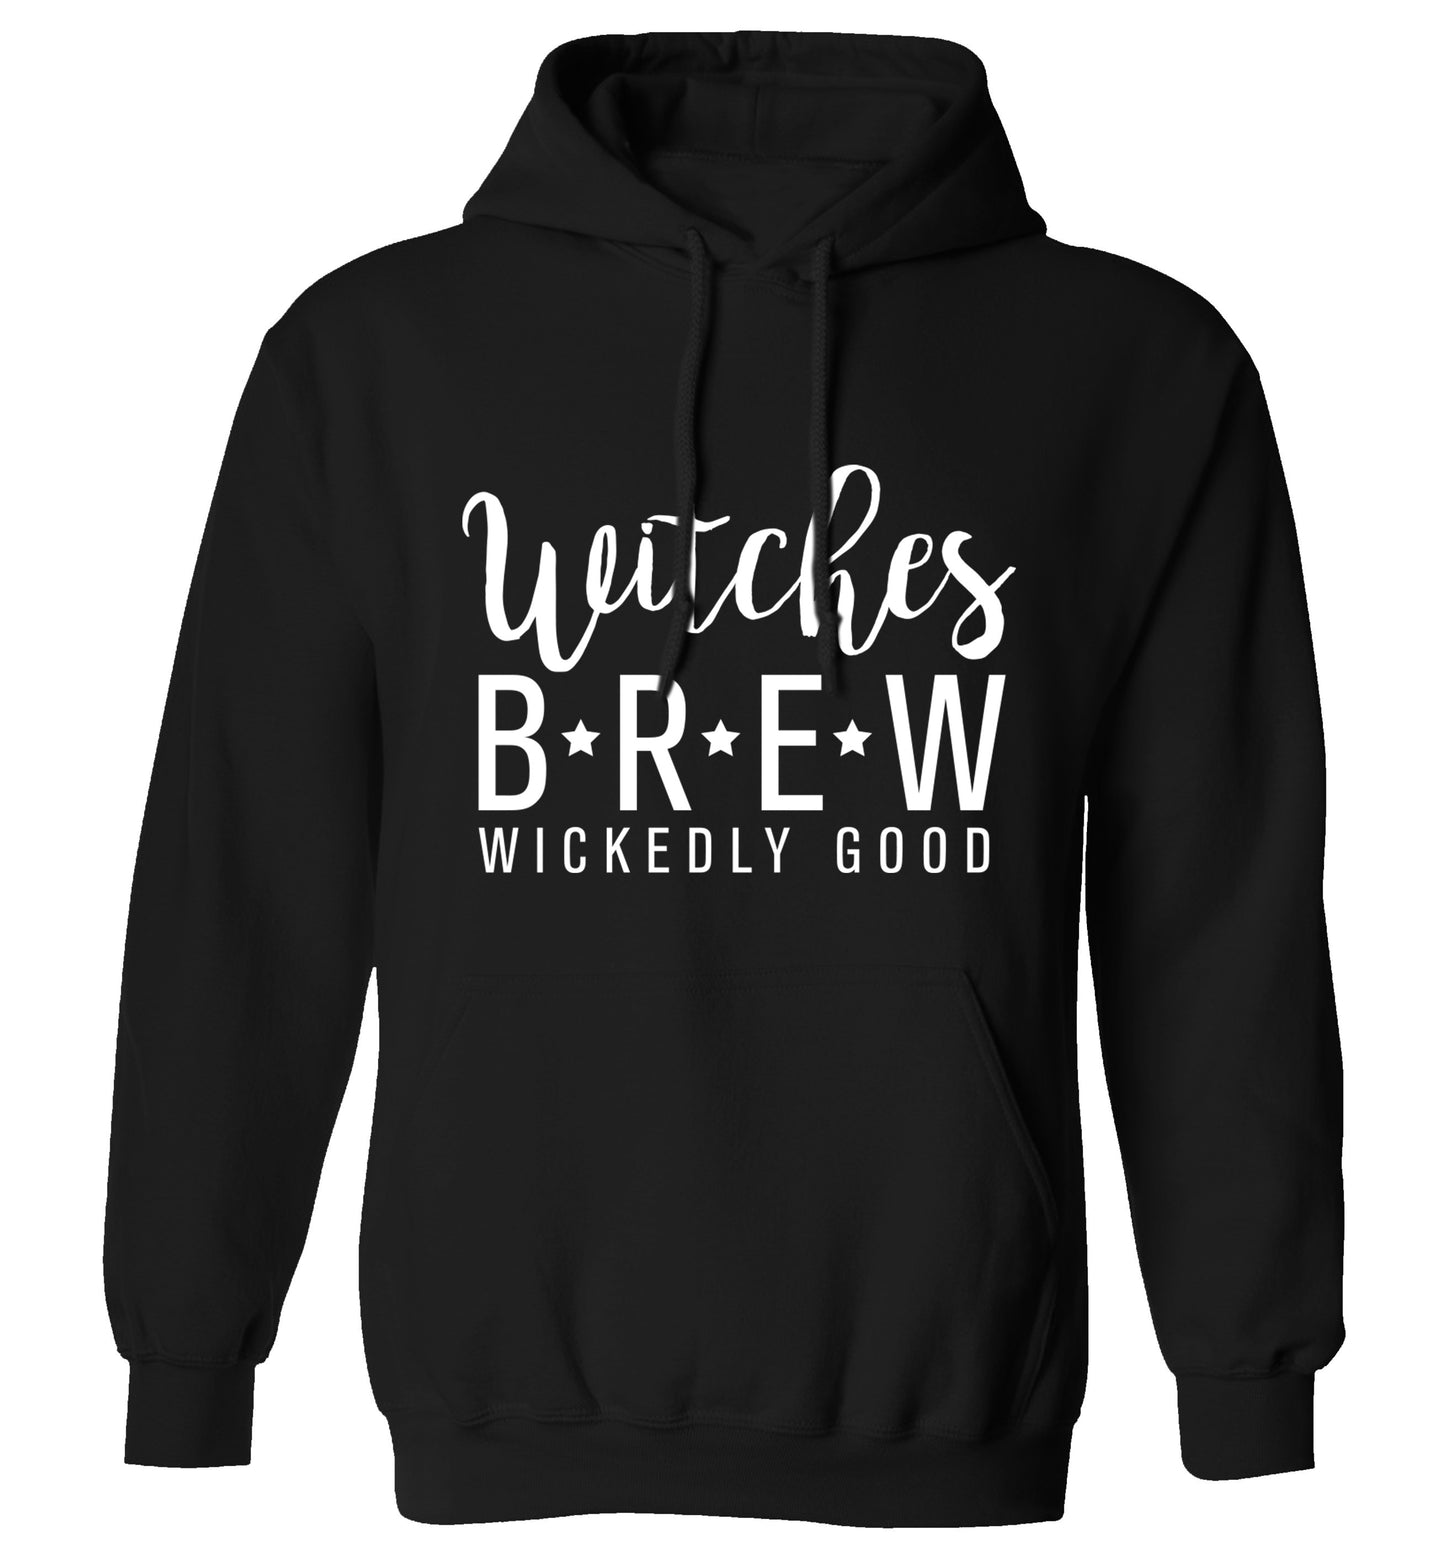 Witches Brew wickedly good adults unisex black hoodie 2XL